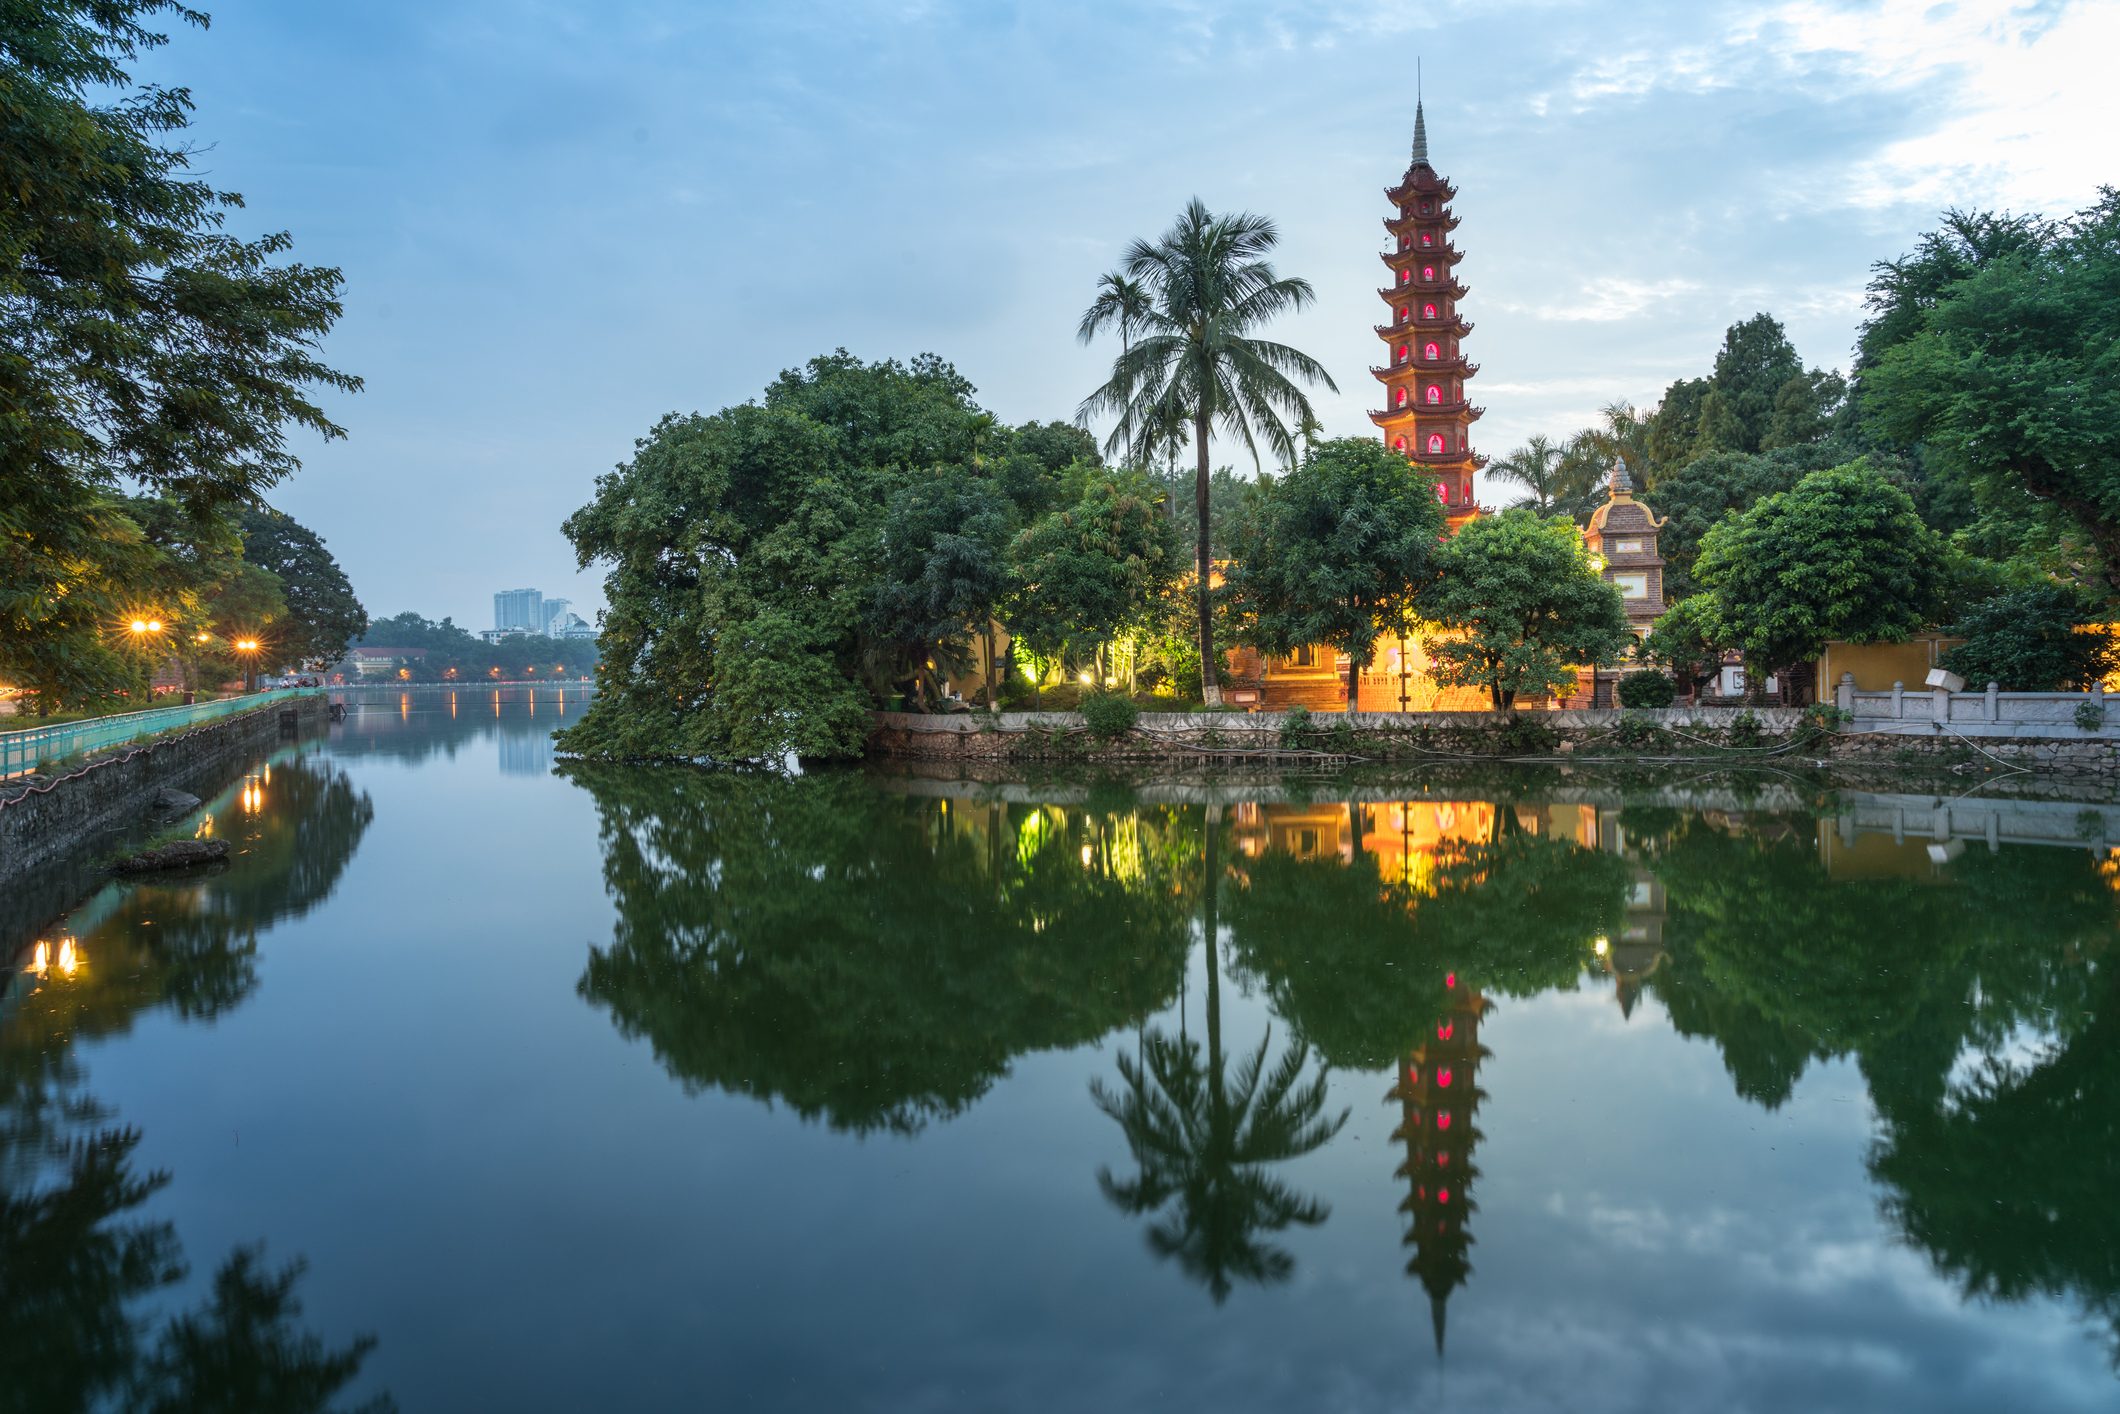 <h3 class="">Asia</h3> <p>If you're looking for a luxe stay for less, Vietnam's culture-filled capital is a destination to watch. Hanoi made it onto <em>Luxury Hotel</em>'s list of the most luxurious hotels for less, with five-star rooms at $118 per night.</p> <p>Travelers can head to Hanoi to get custom tailoring for a fraction of the cost. You can have button-down shirts made to order for $10, or an entire wardrobe made for less than the cost of a pair of designer jeans, and in about 48 hours. Avoid this northern Vietnamese area in the summer monsoon season, and instead choose early spring or fall for good weather and airfare prices around $800 round trip.</p>